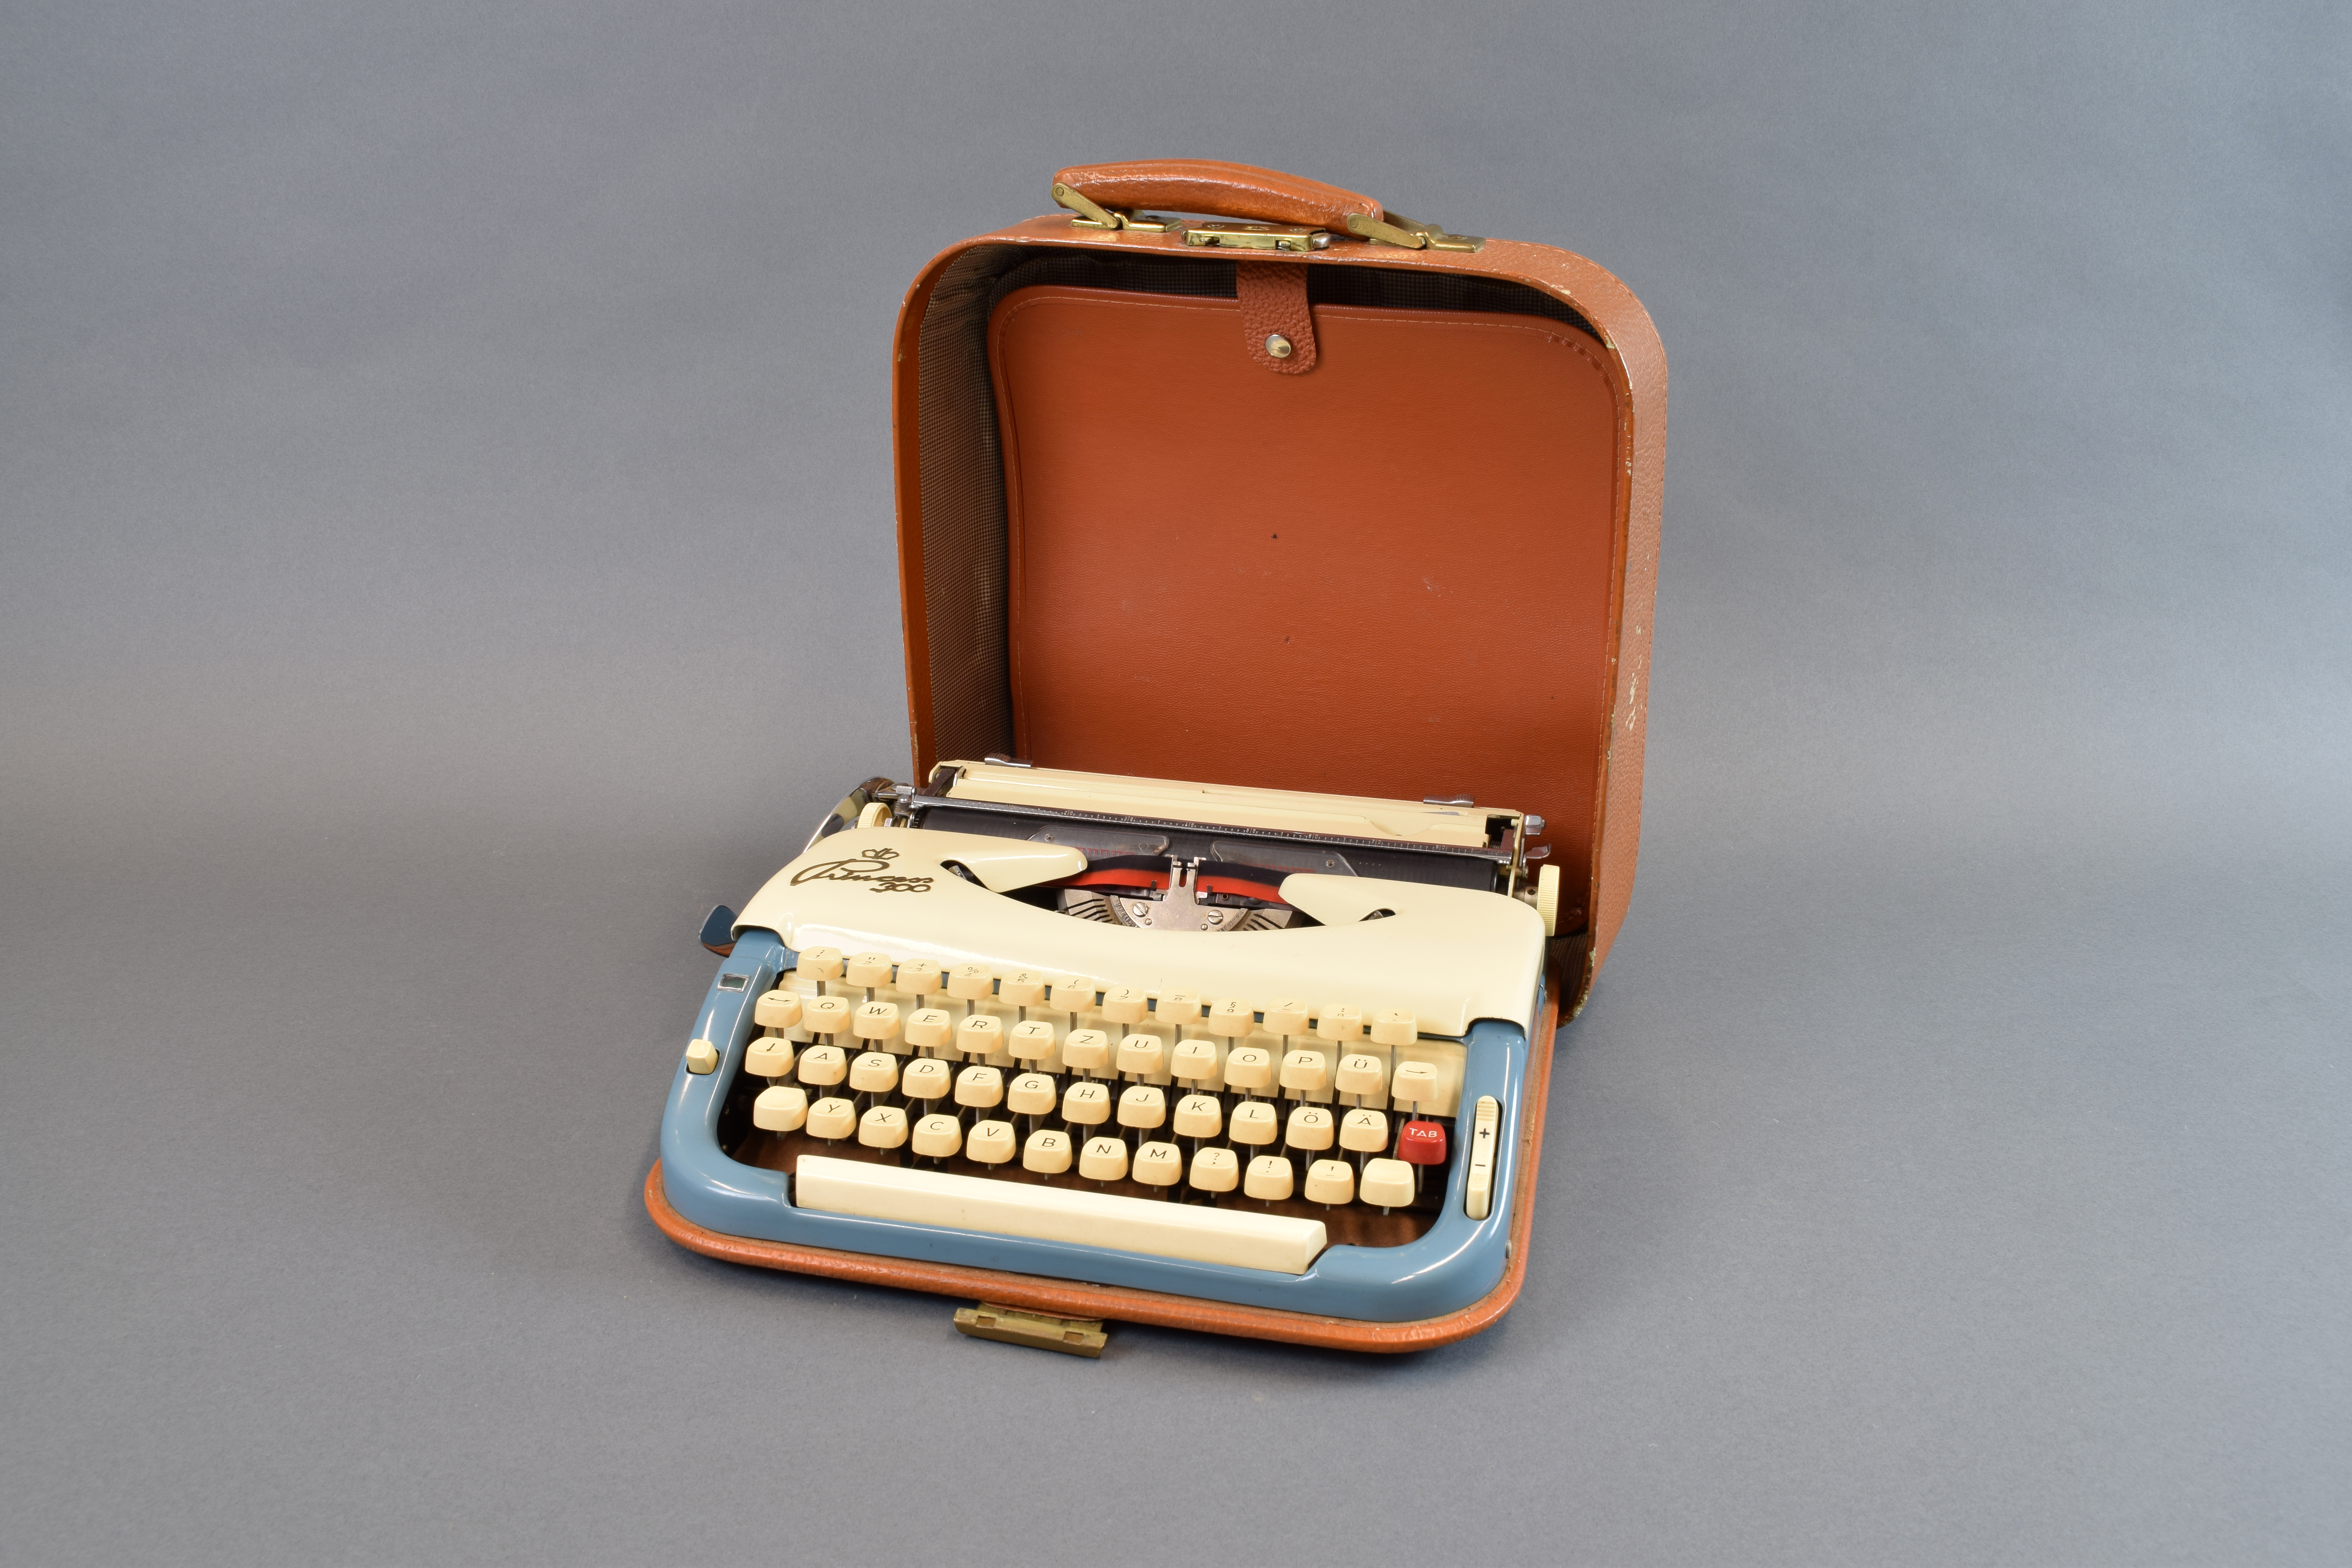 Theodor Wonja Michael's travel typewriter from the 1960s. The typewriter is now part of the DOMiD collection. Photo: DOMiD Archive, Cologne